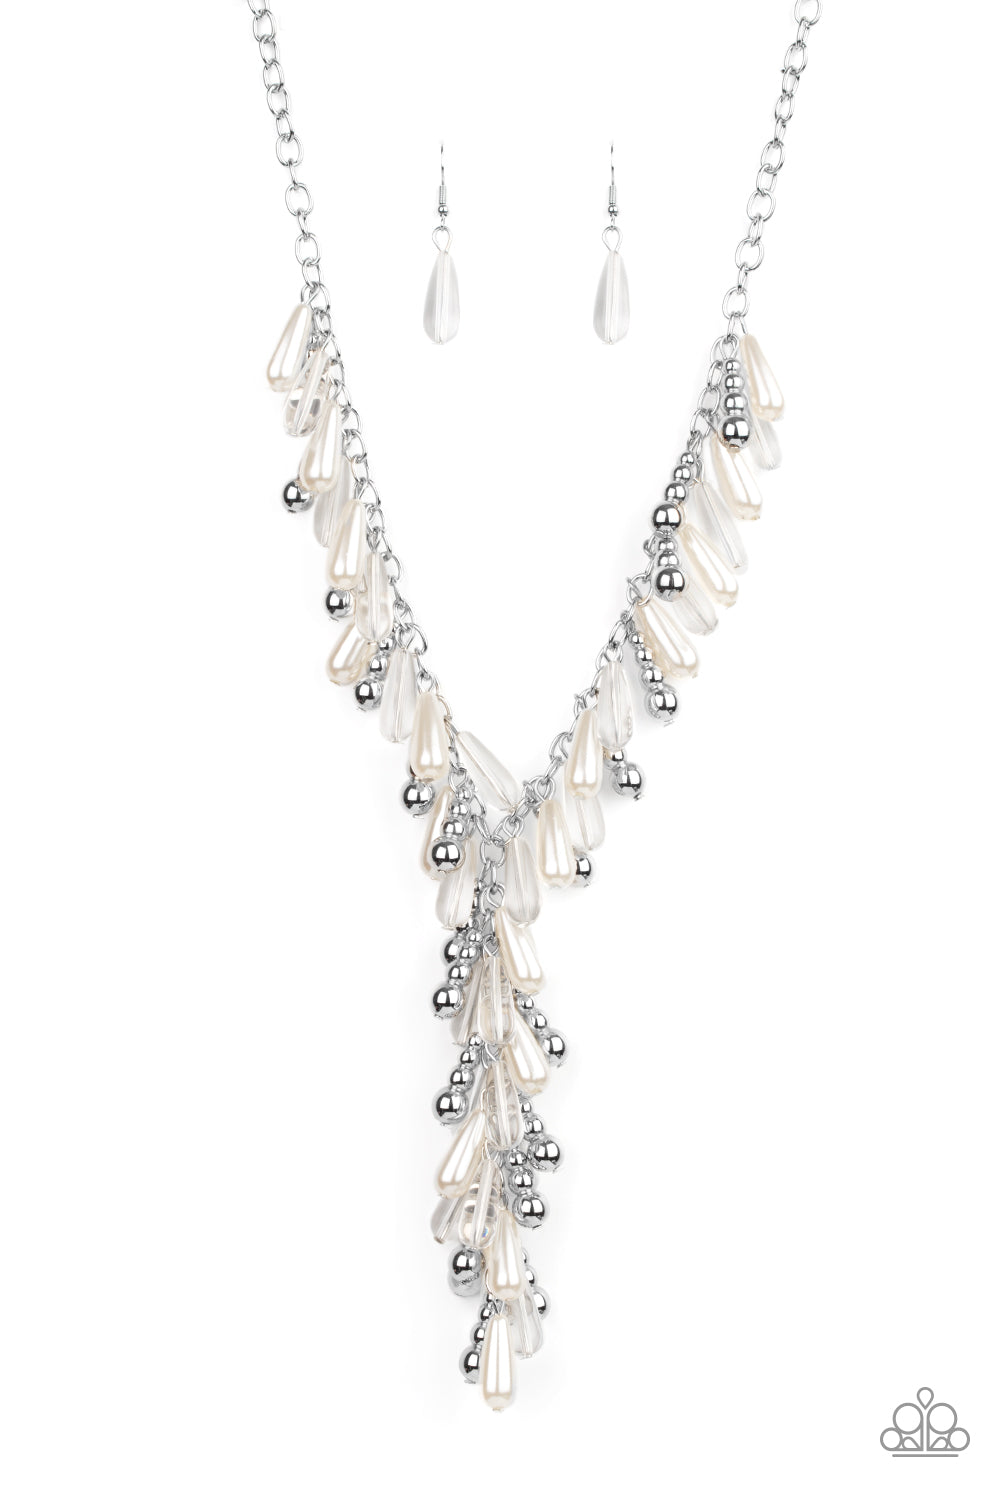 1470 Dripping With DIVA-ttitude - White necklace